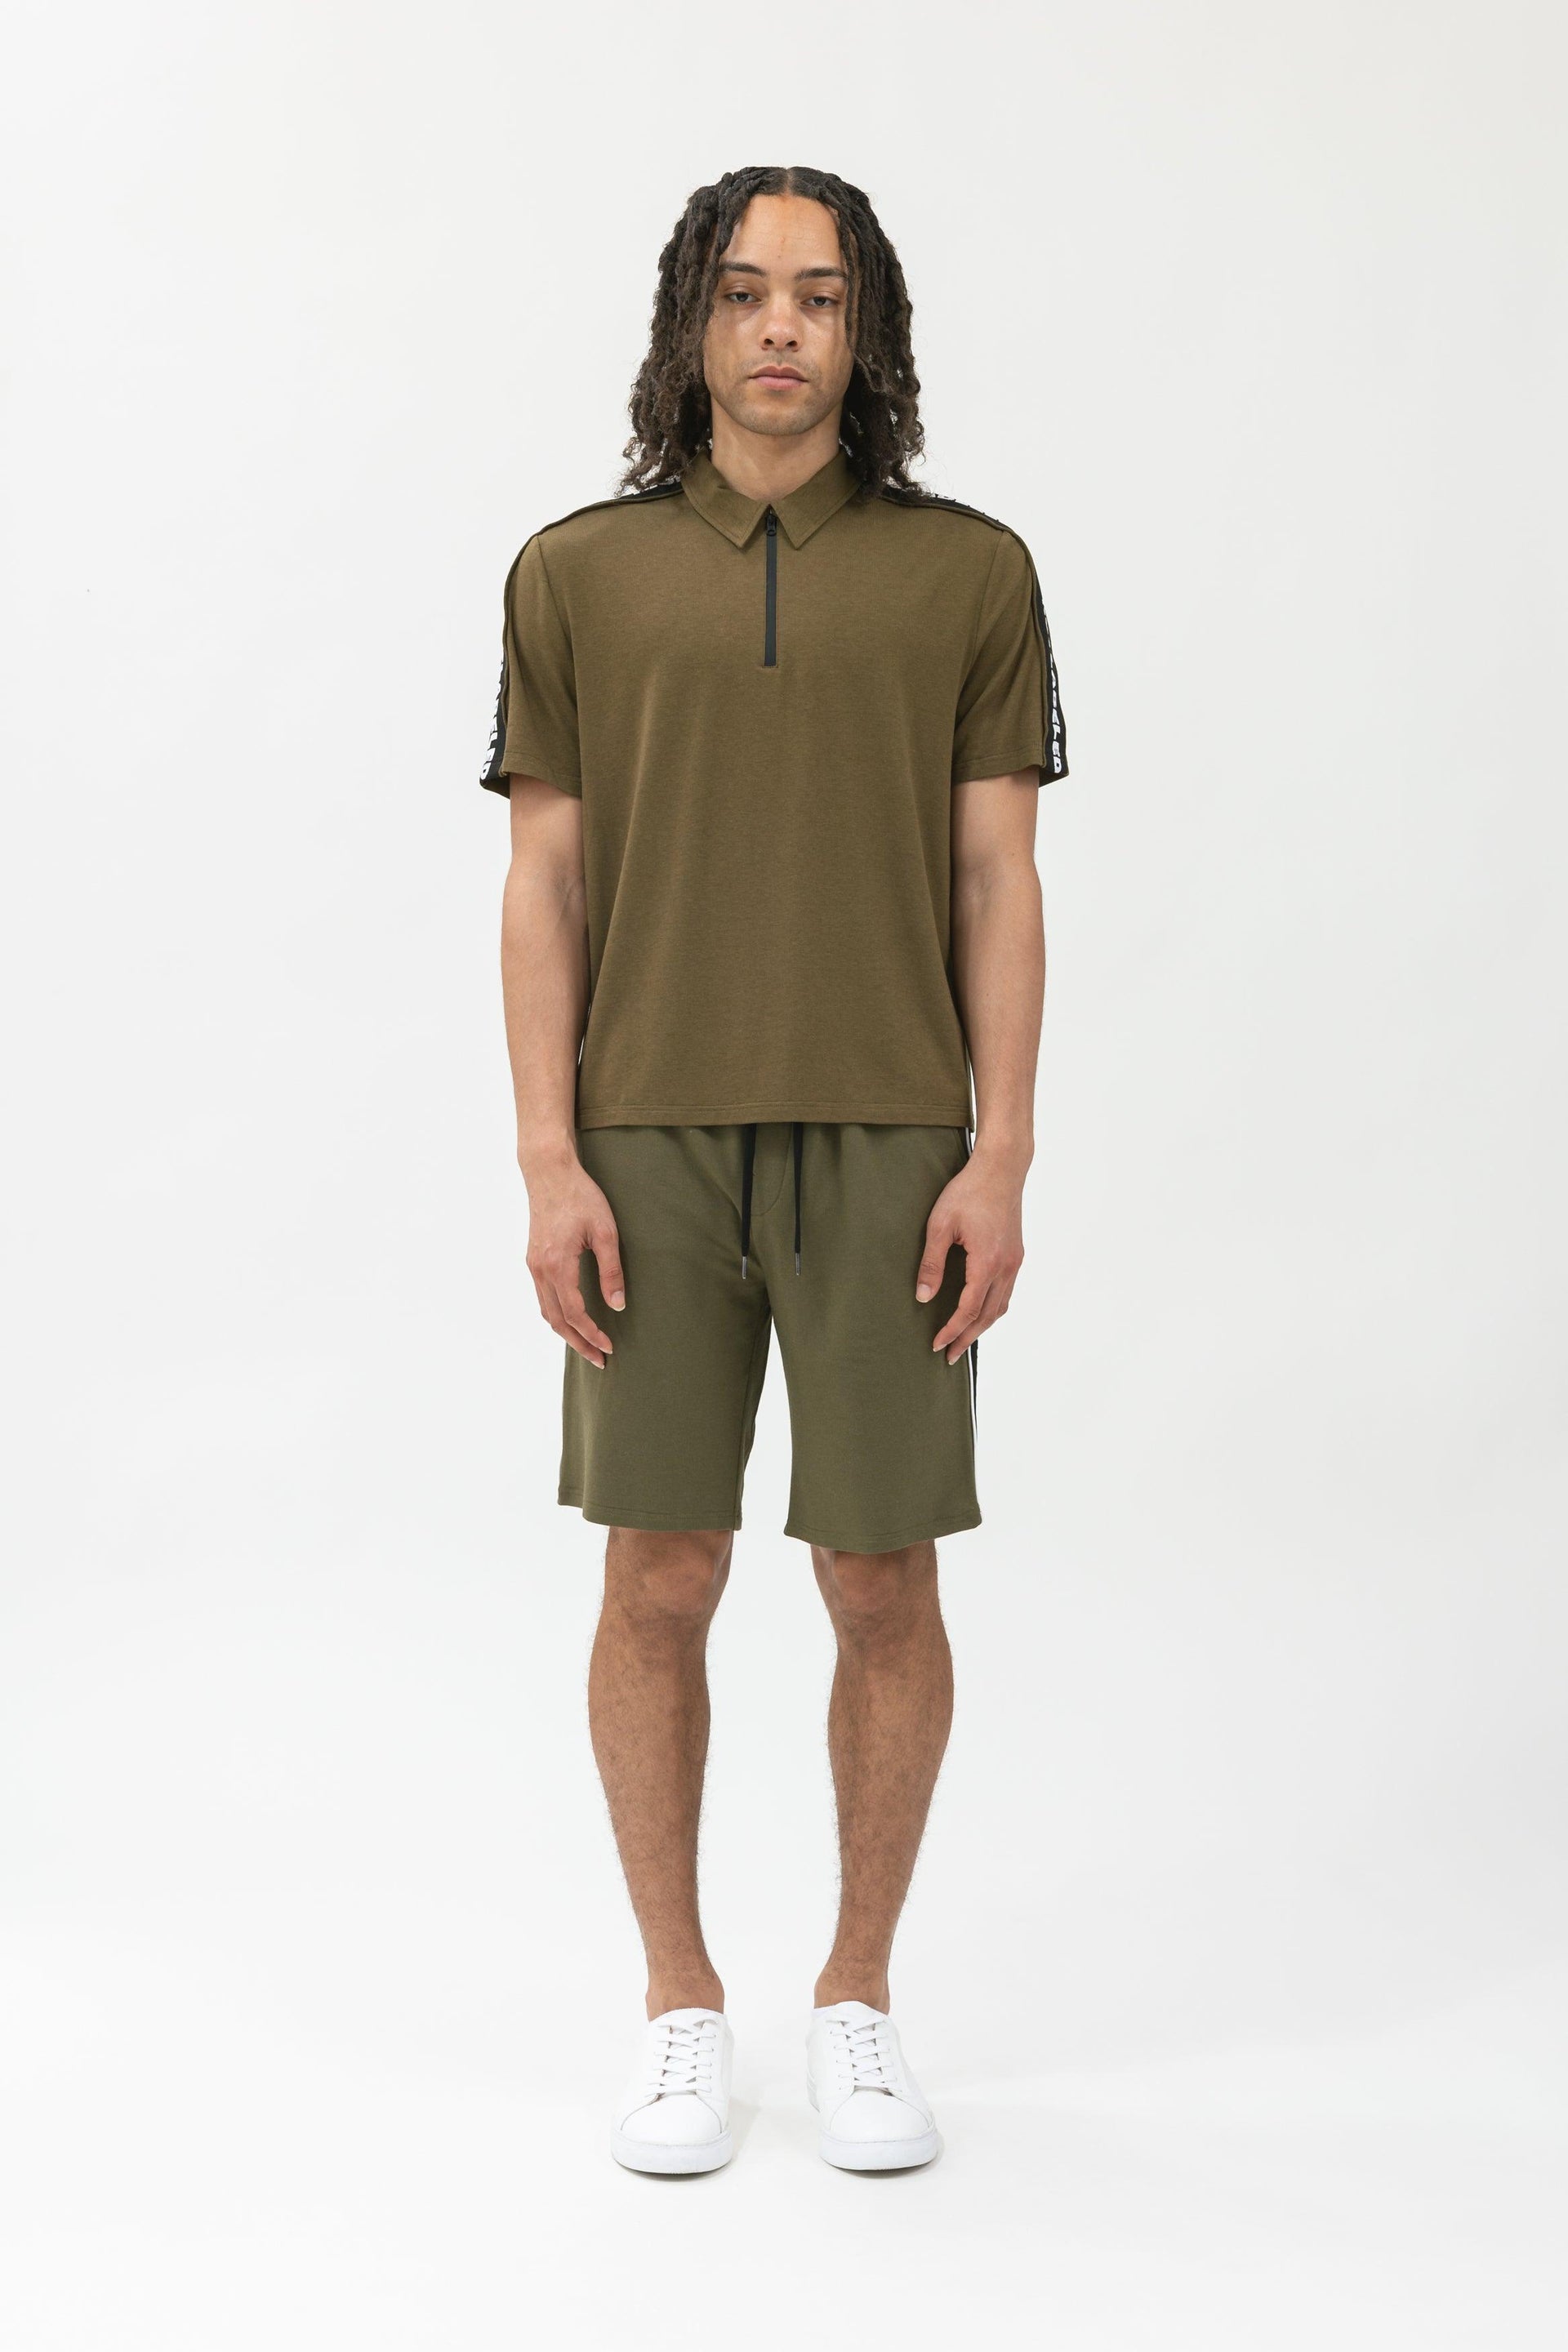 Bamboo Shirts for Men: Comfortable, Sustainable Fashion